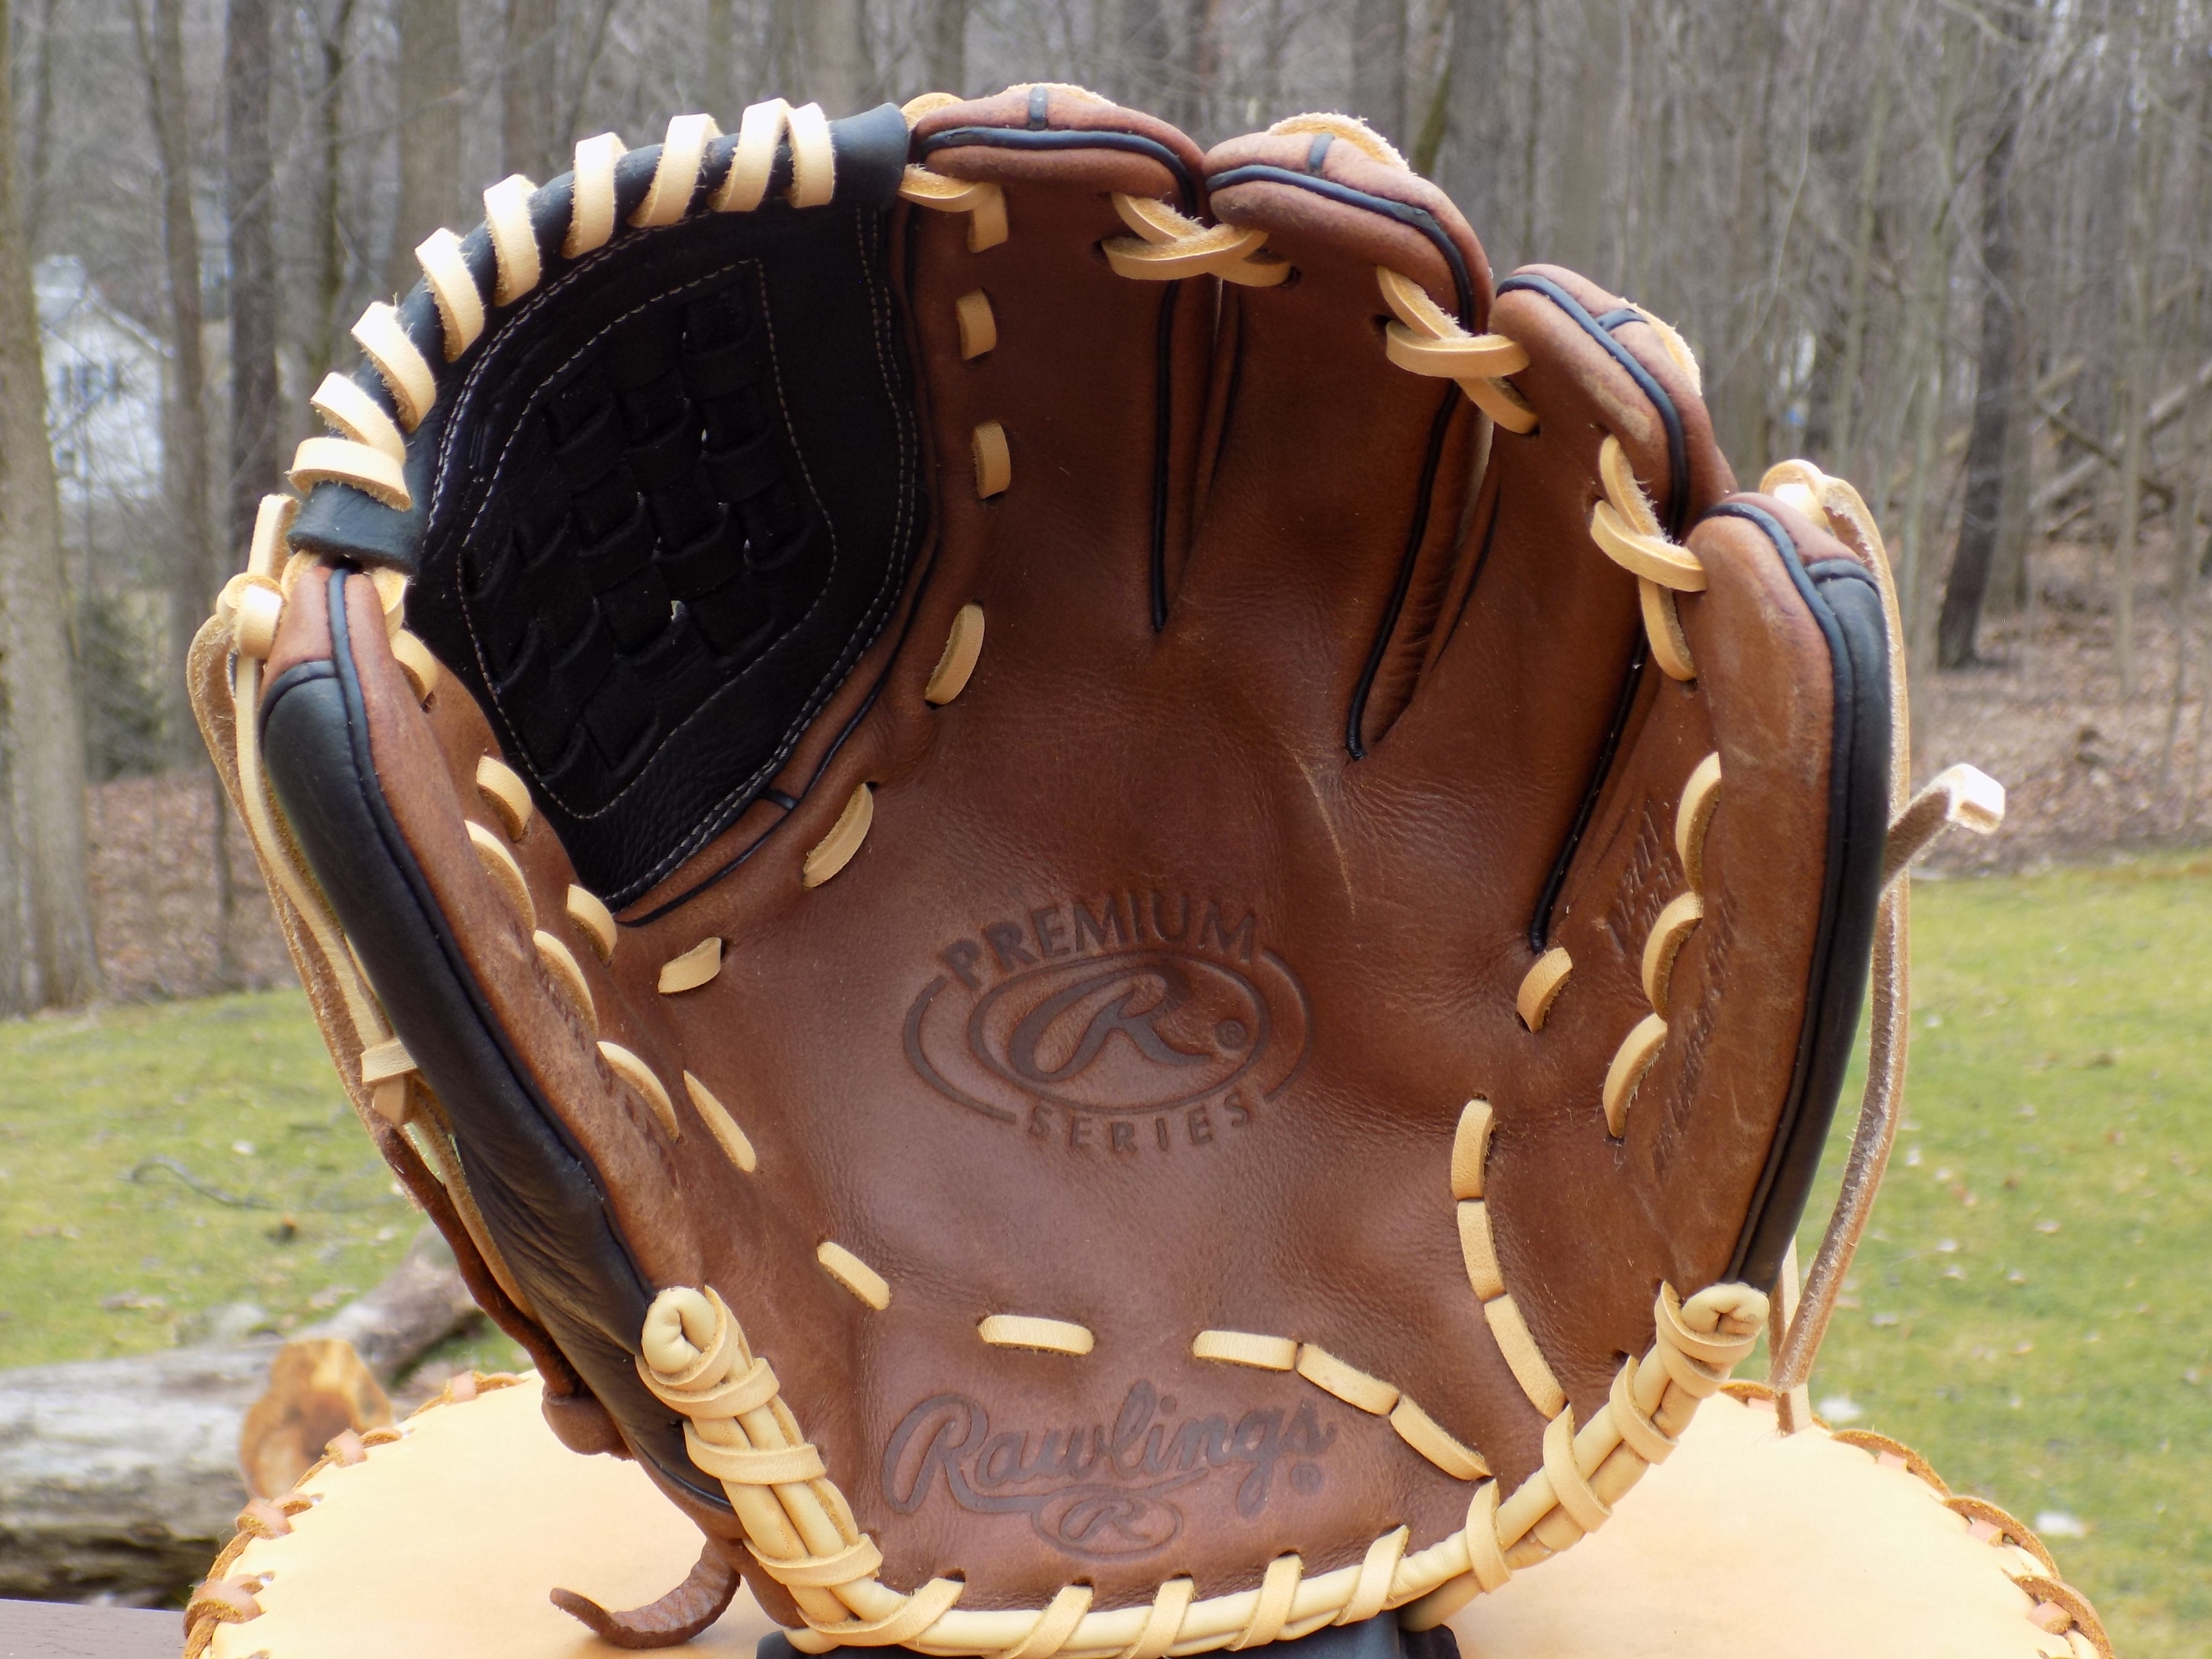 Used Rawlings Pitcher's Right Hand Throw Premium Series Baseball Glove 12"